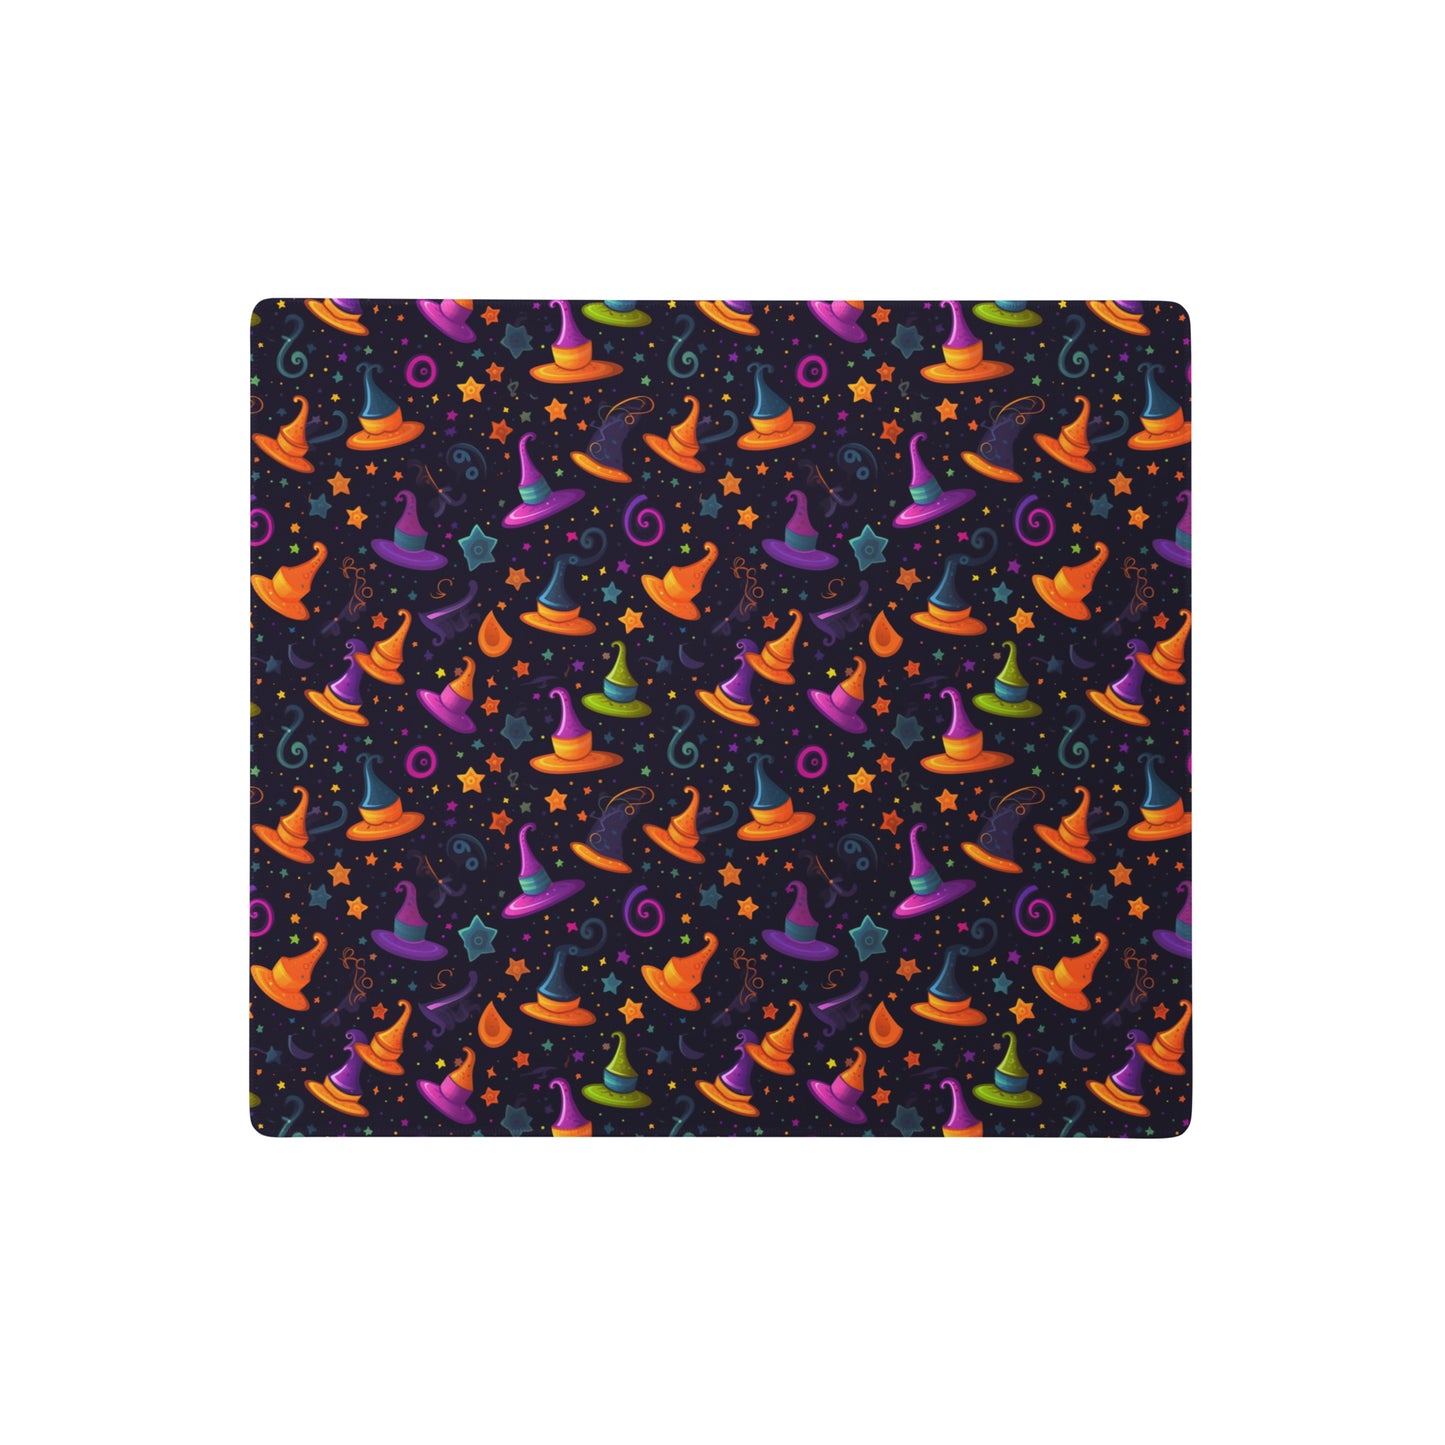 A 18" x 16" desk pad with a orange and purple wizard hat pattern.